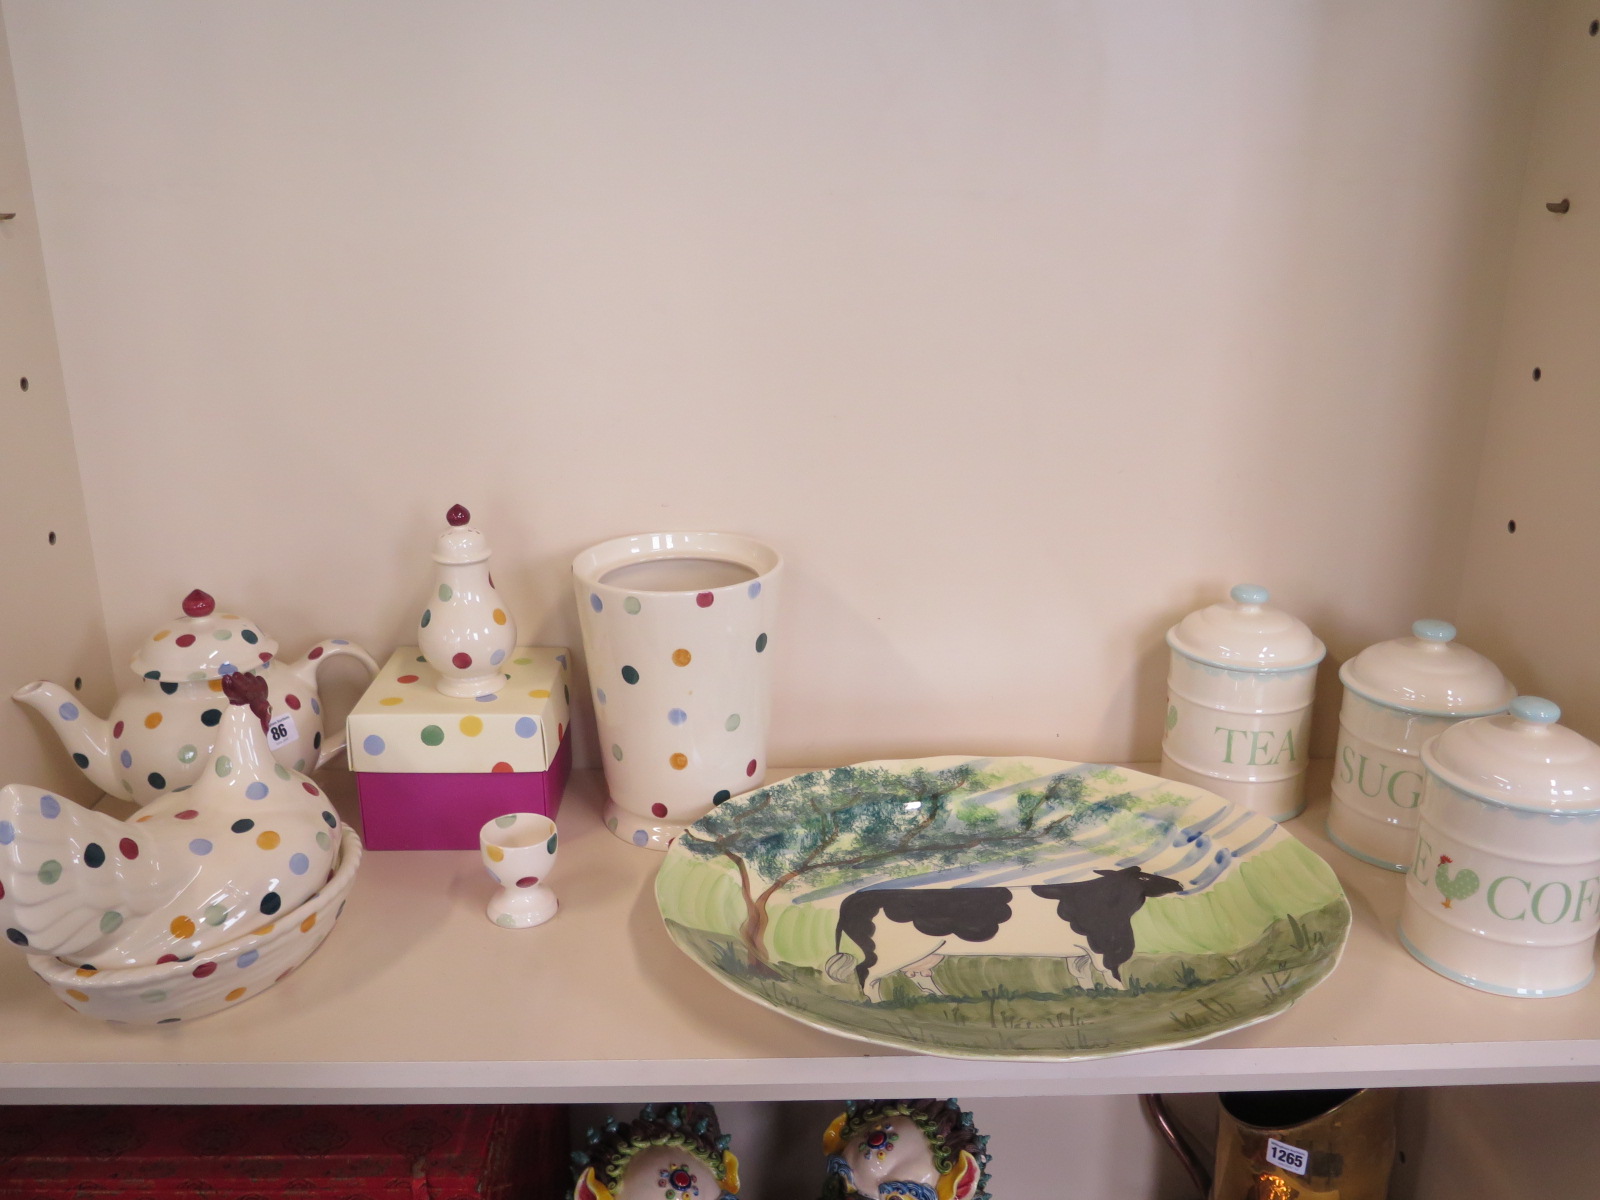 Five Emma Bridgewater items including a sugar shaker, biscuit barrel missing its lid, and three